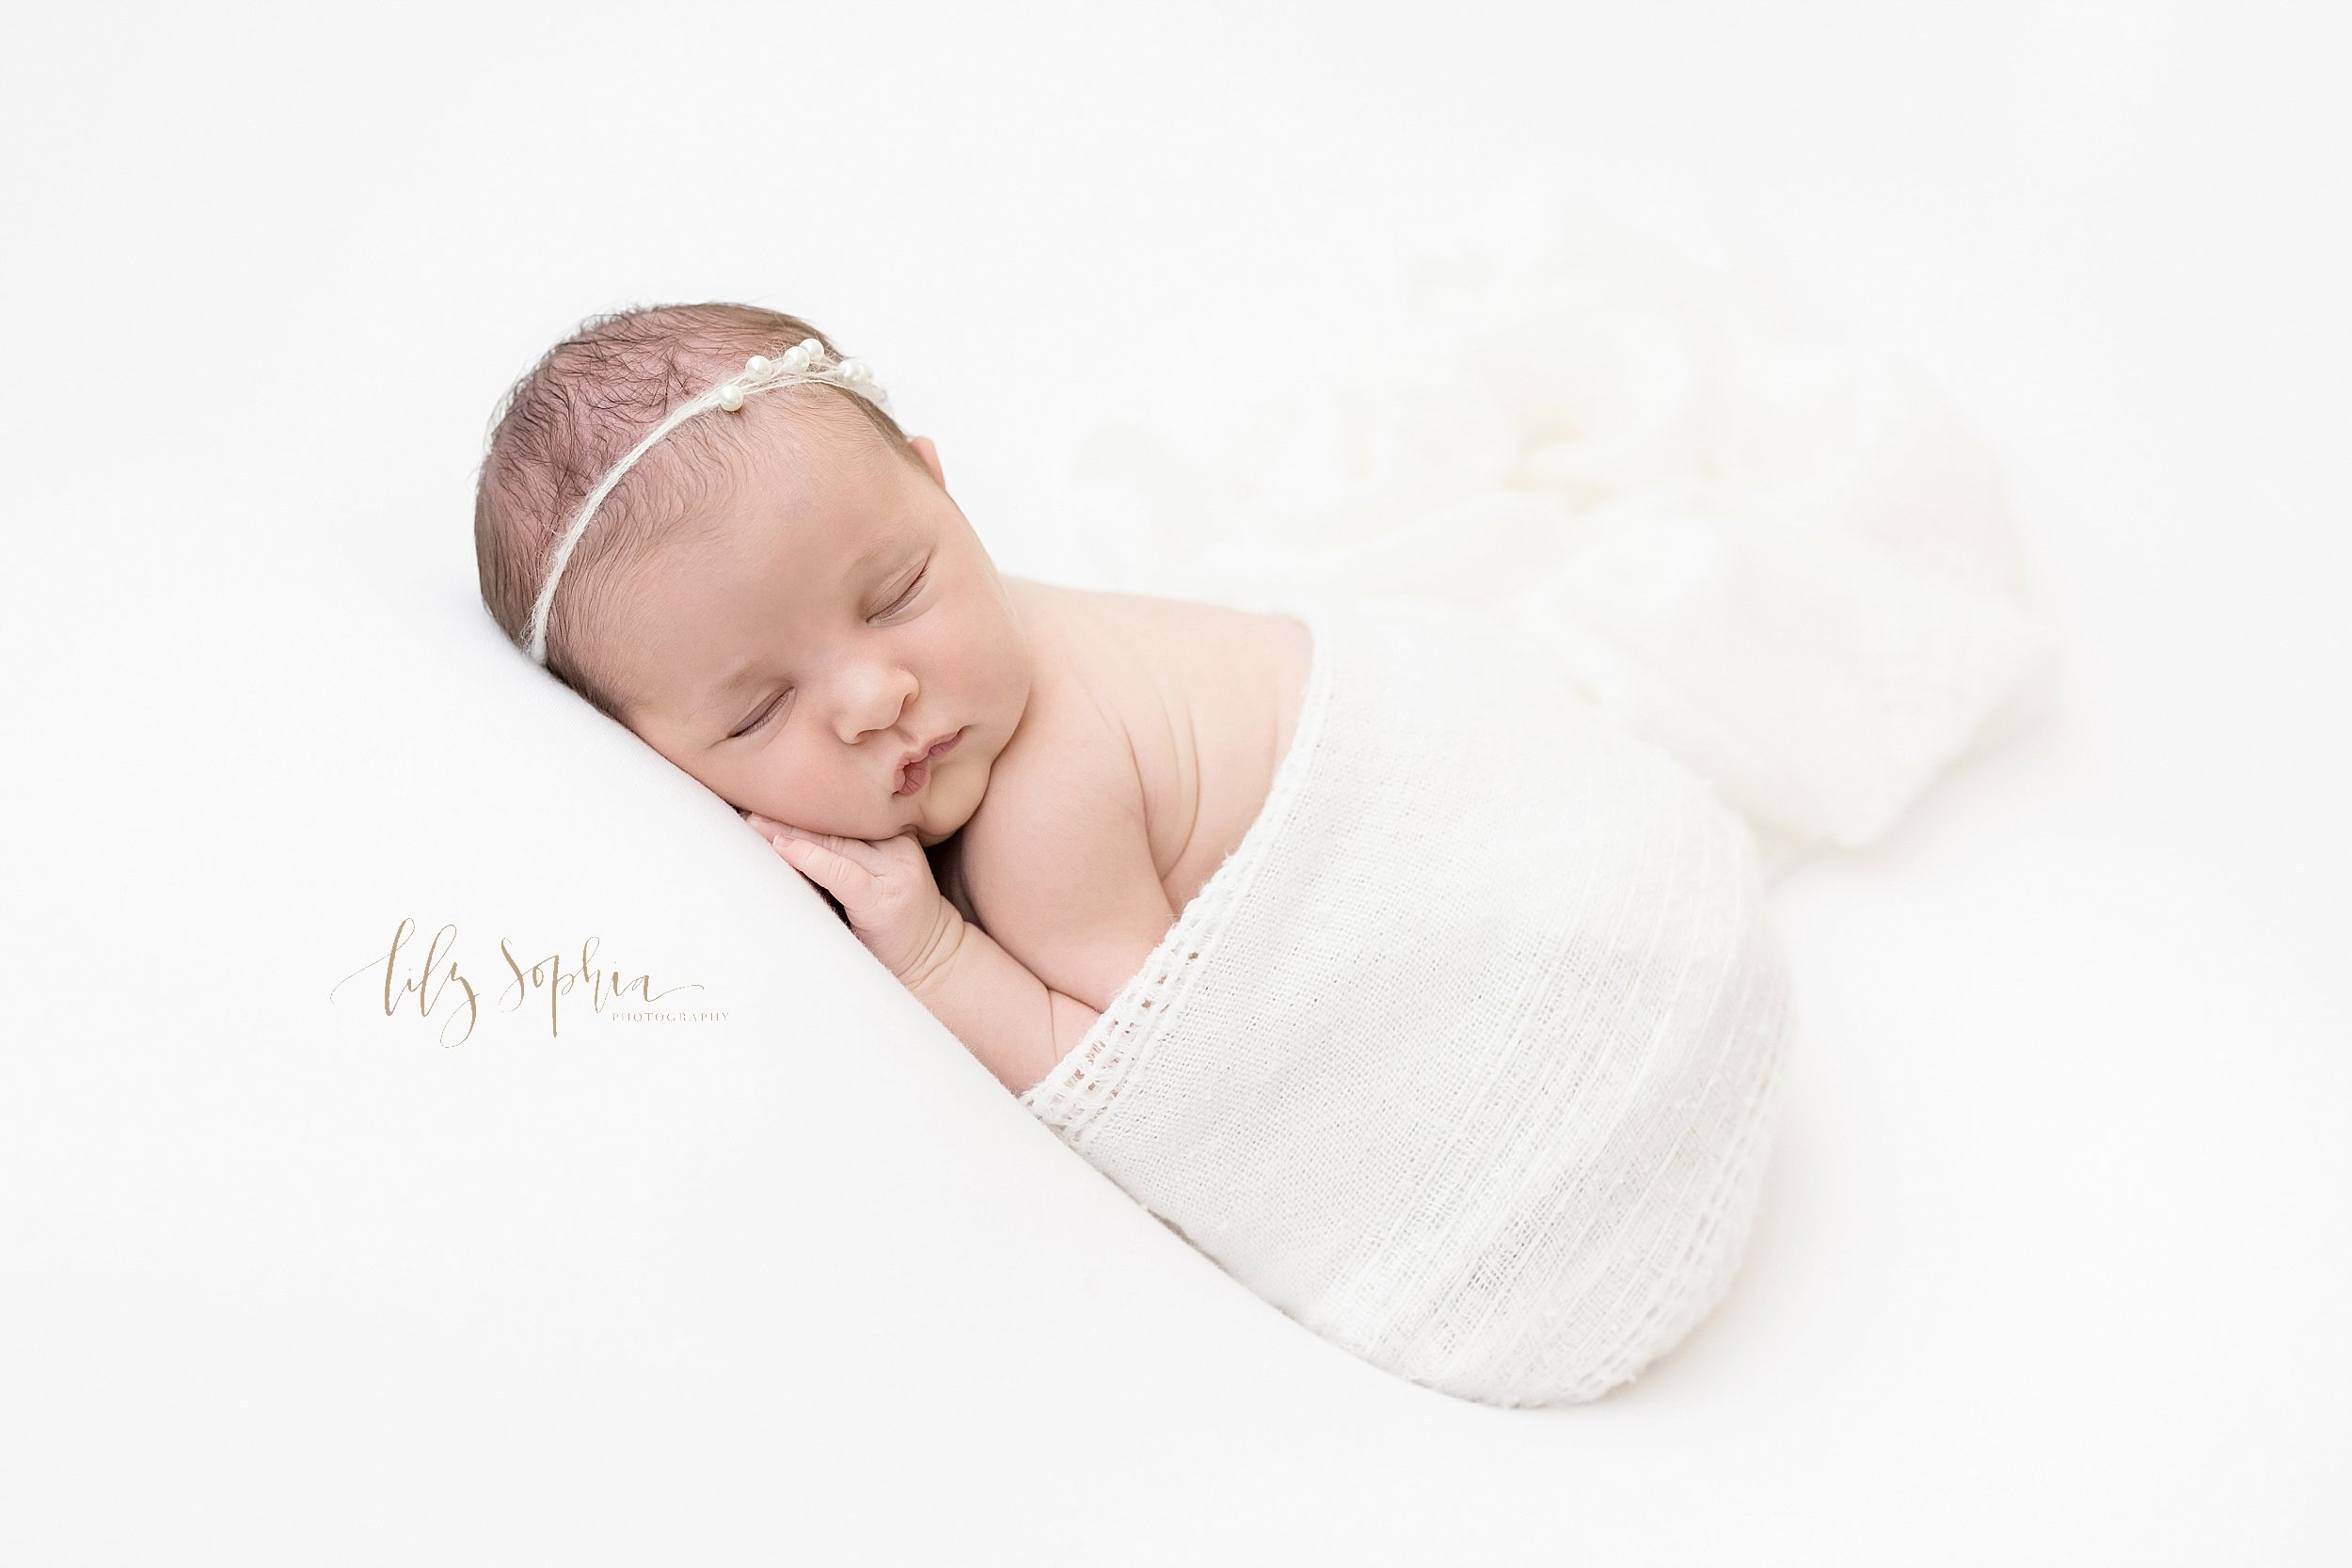  Newborn portrait of a slumbering infant girl sitting in a knitted blanket with her wrinkly back showing taken in a studio near Alpharetta in Atlanta that uses natural lighting. 